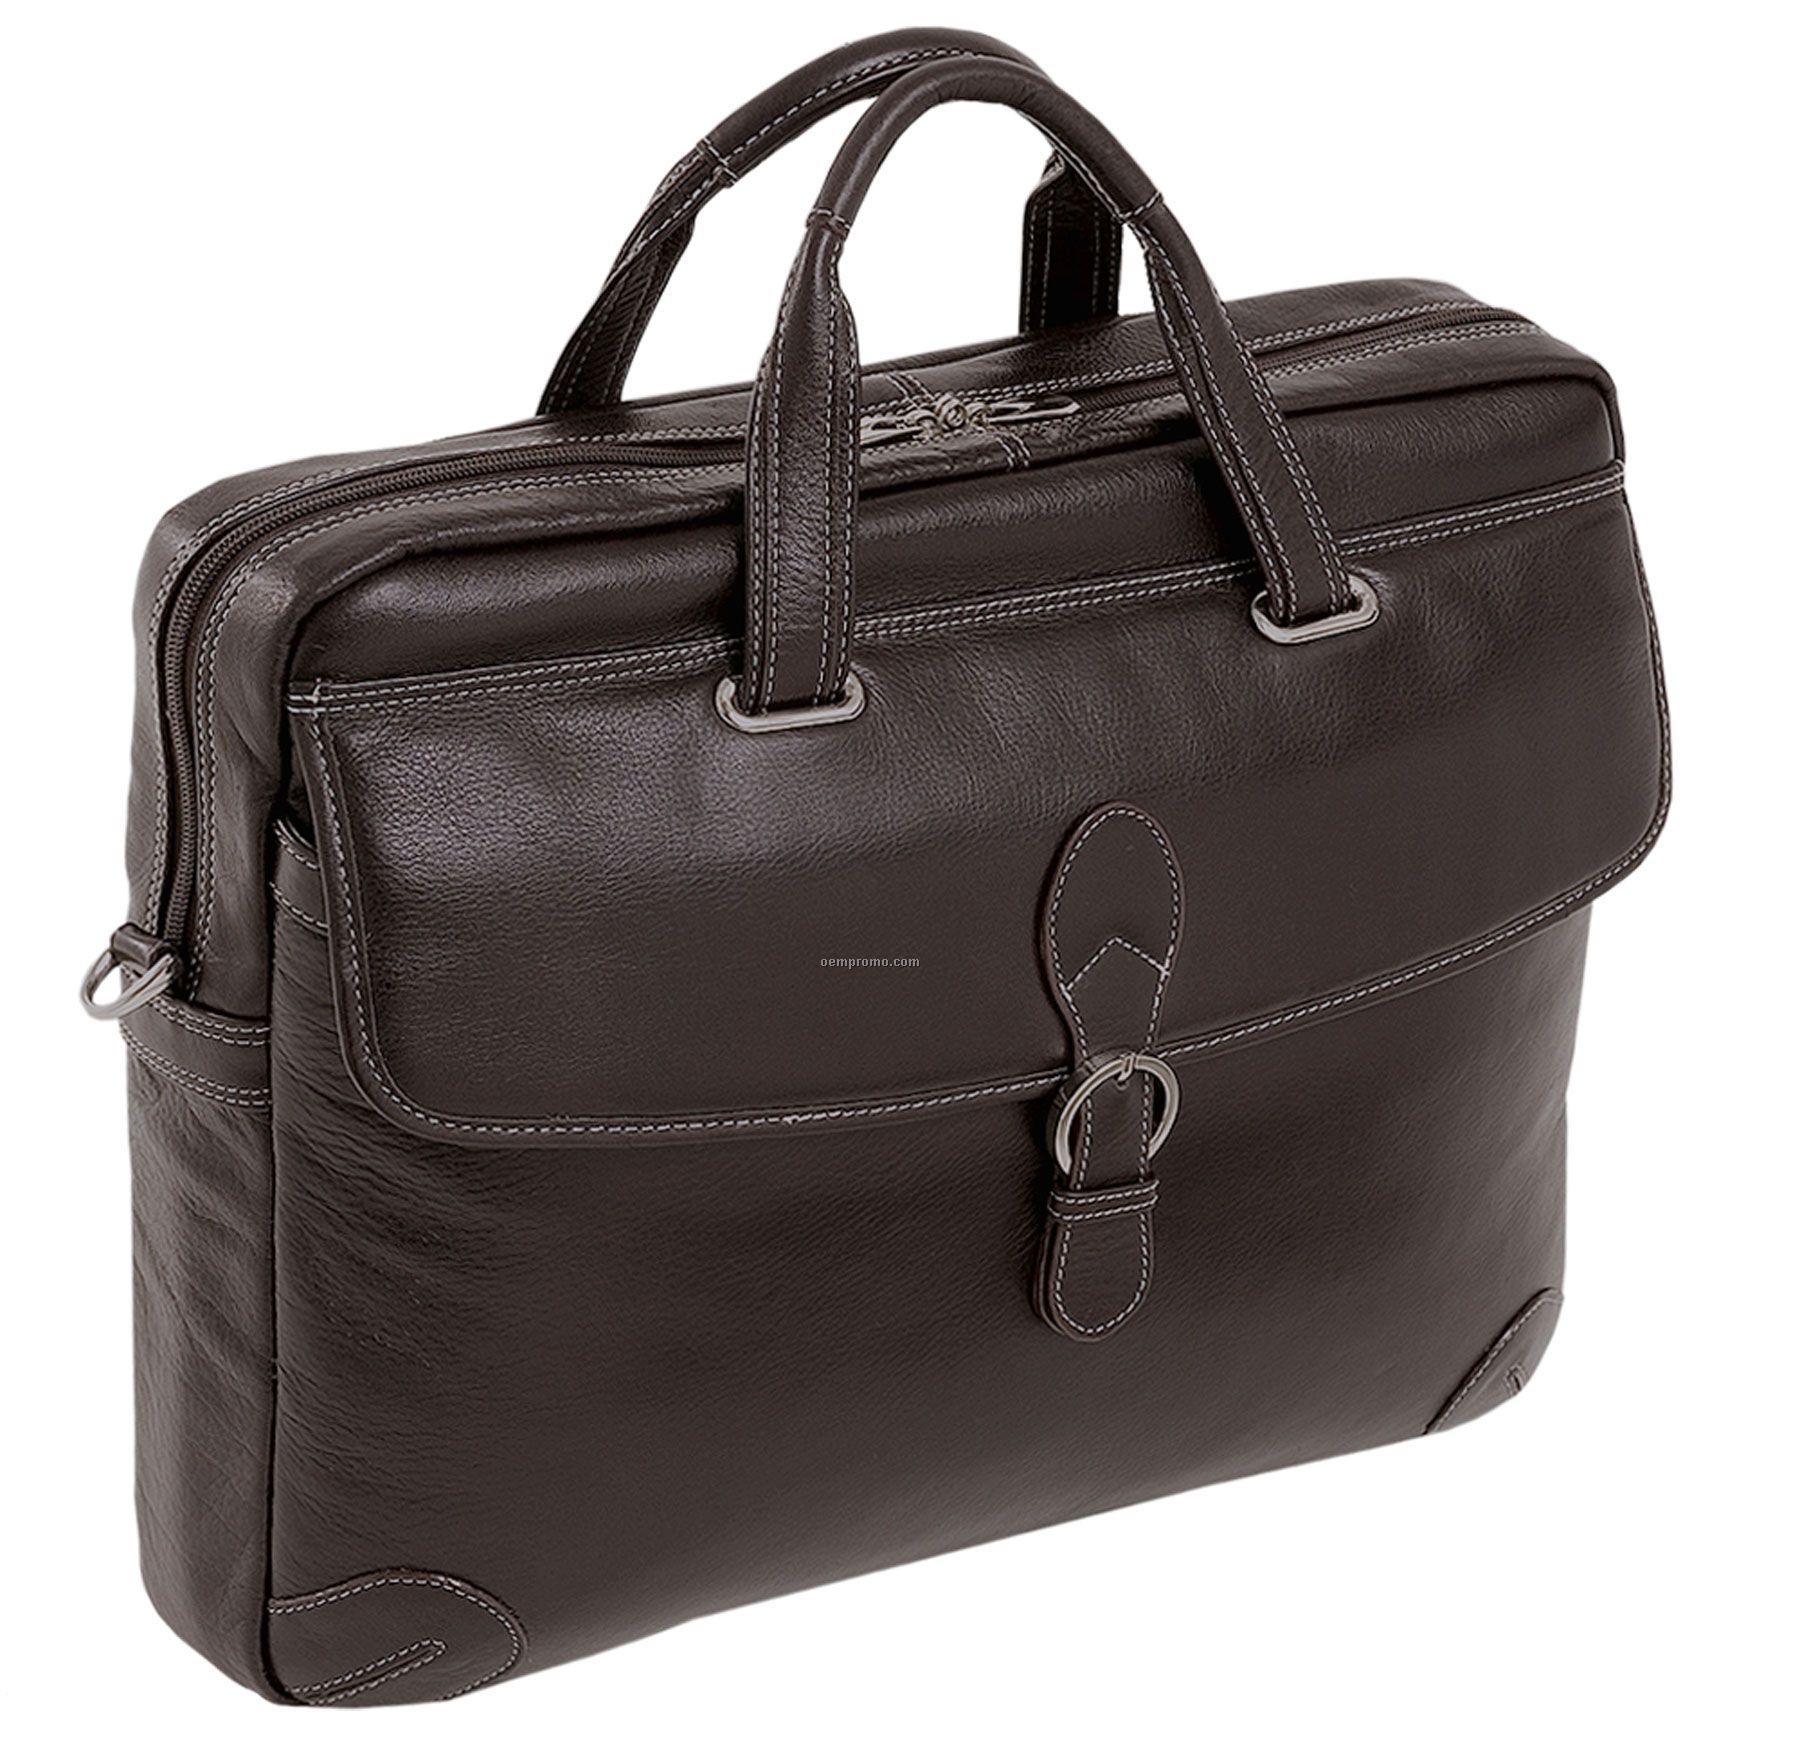 Fontanella Leather Large Laptop Brief - Chocolate Brown